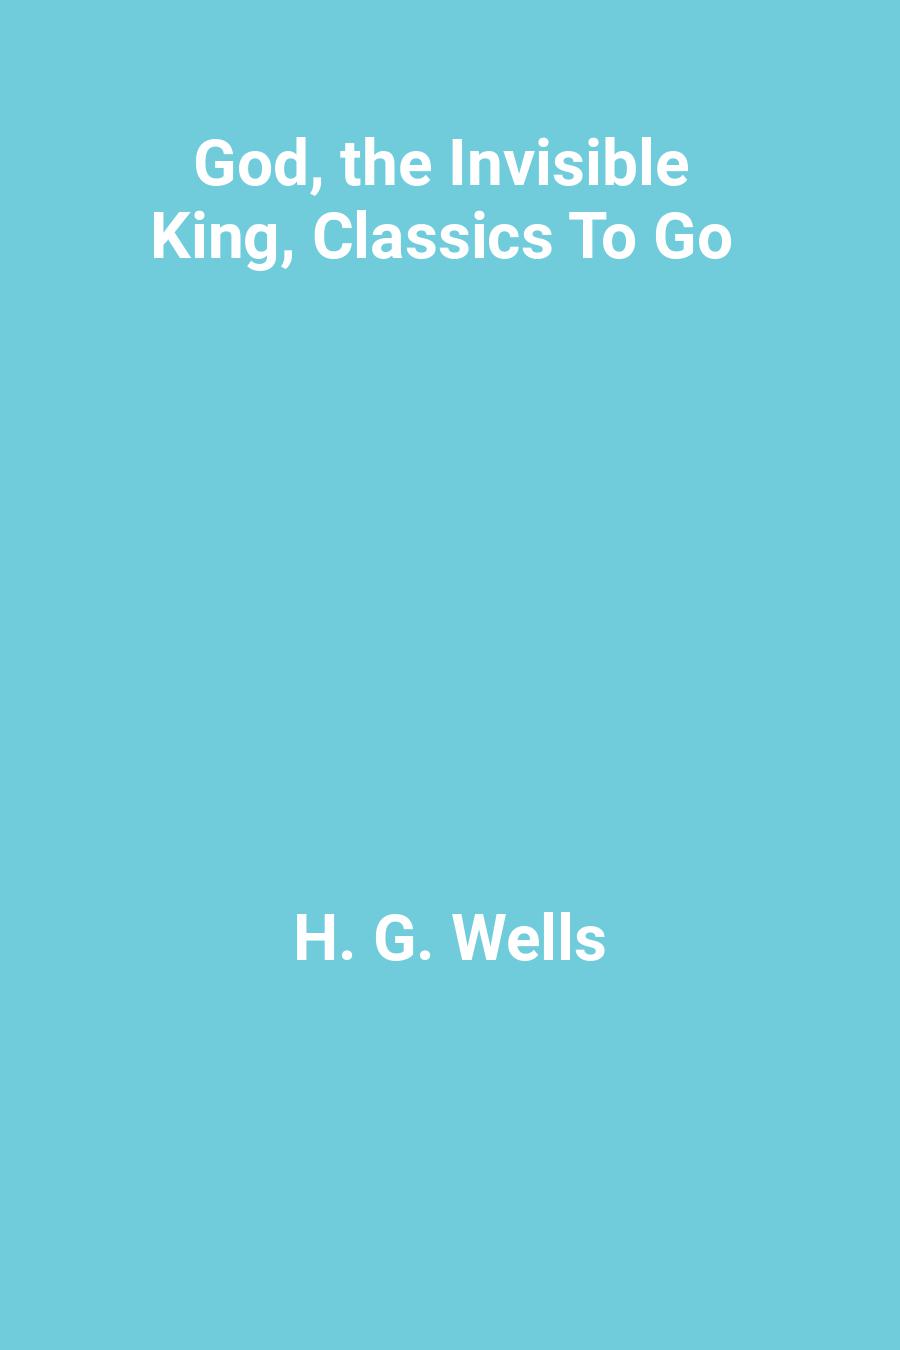 God, the Invisible King, Classics To Go